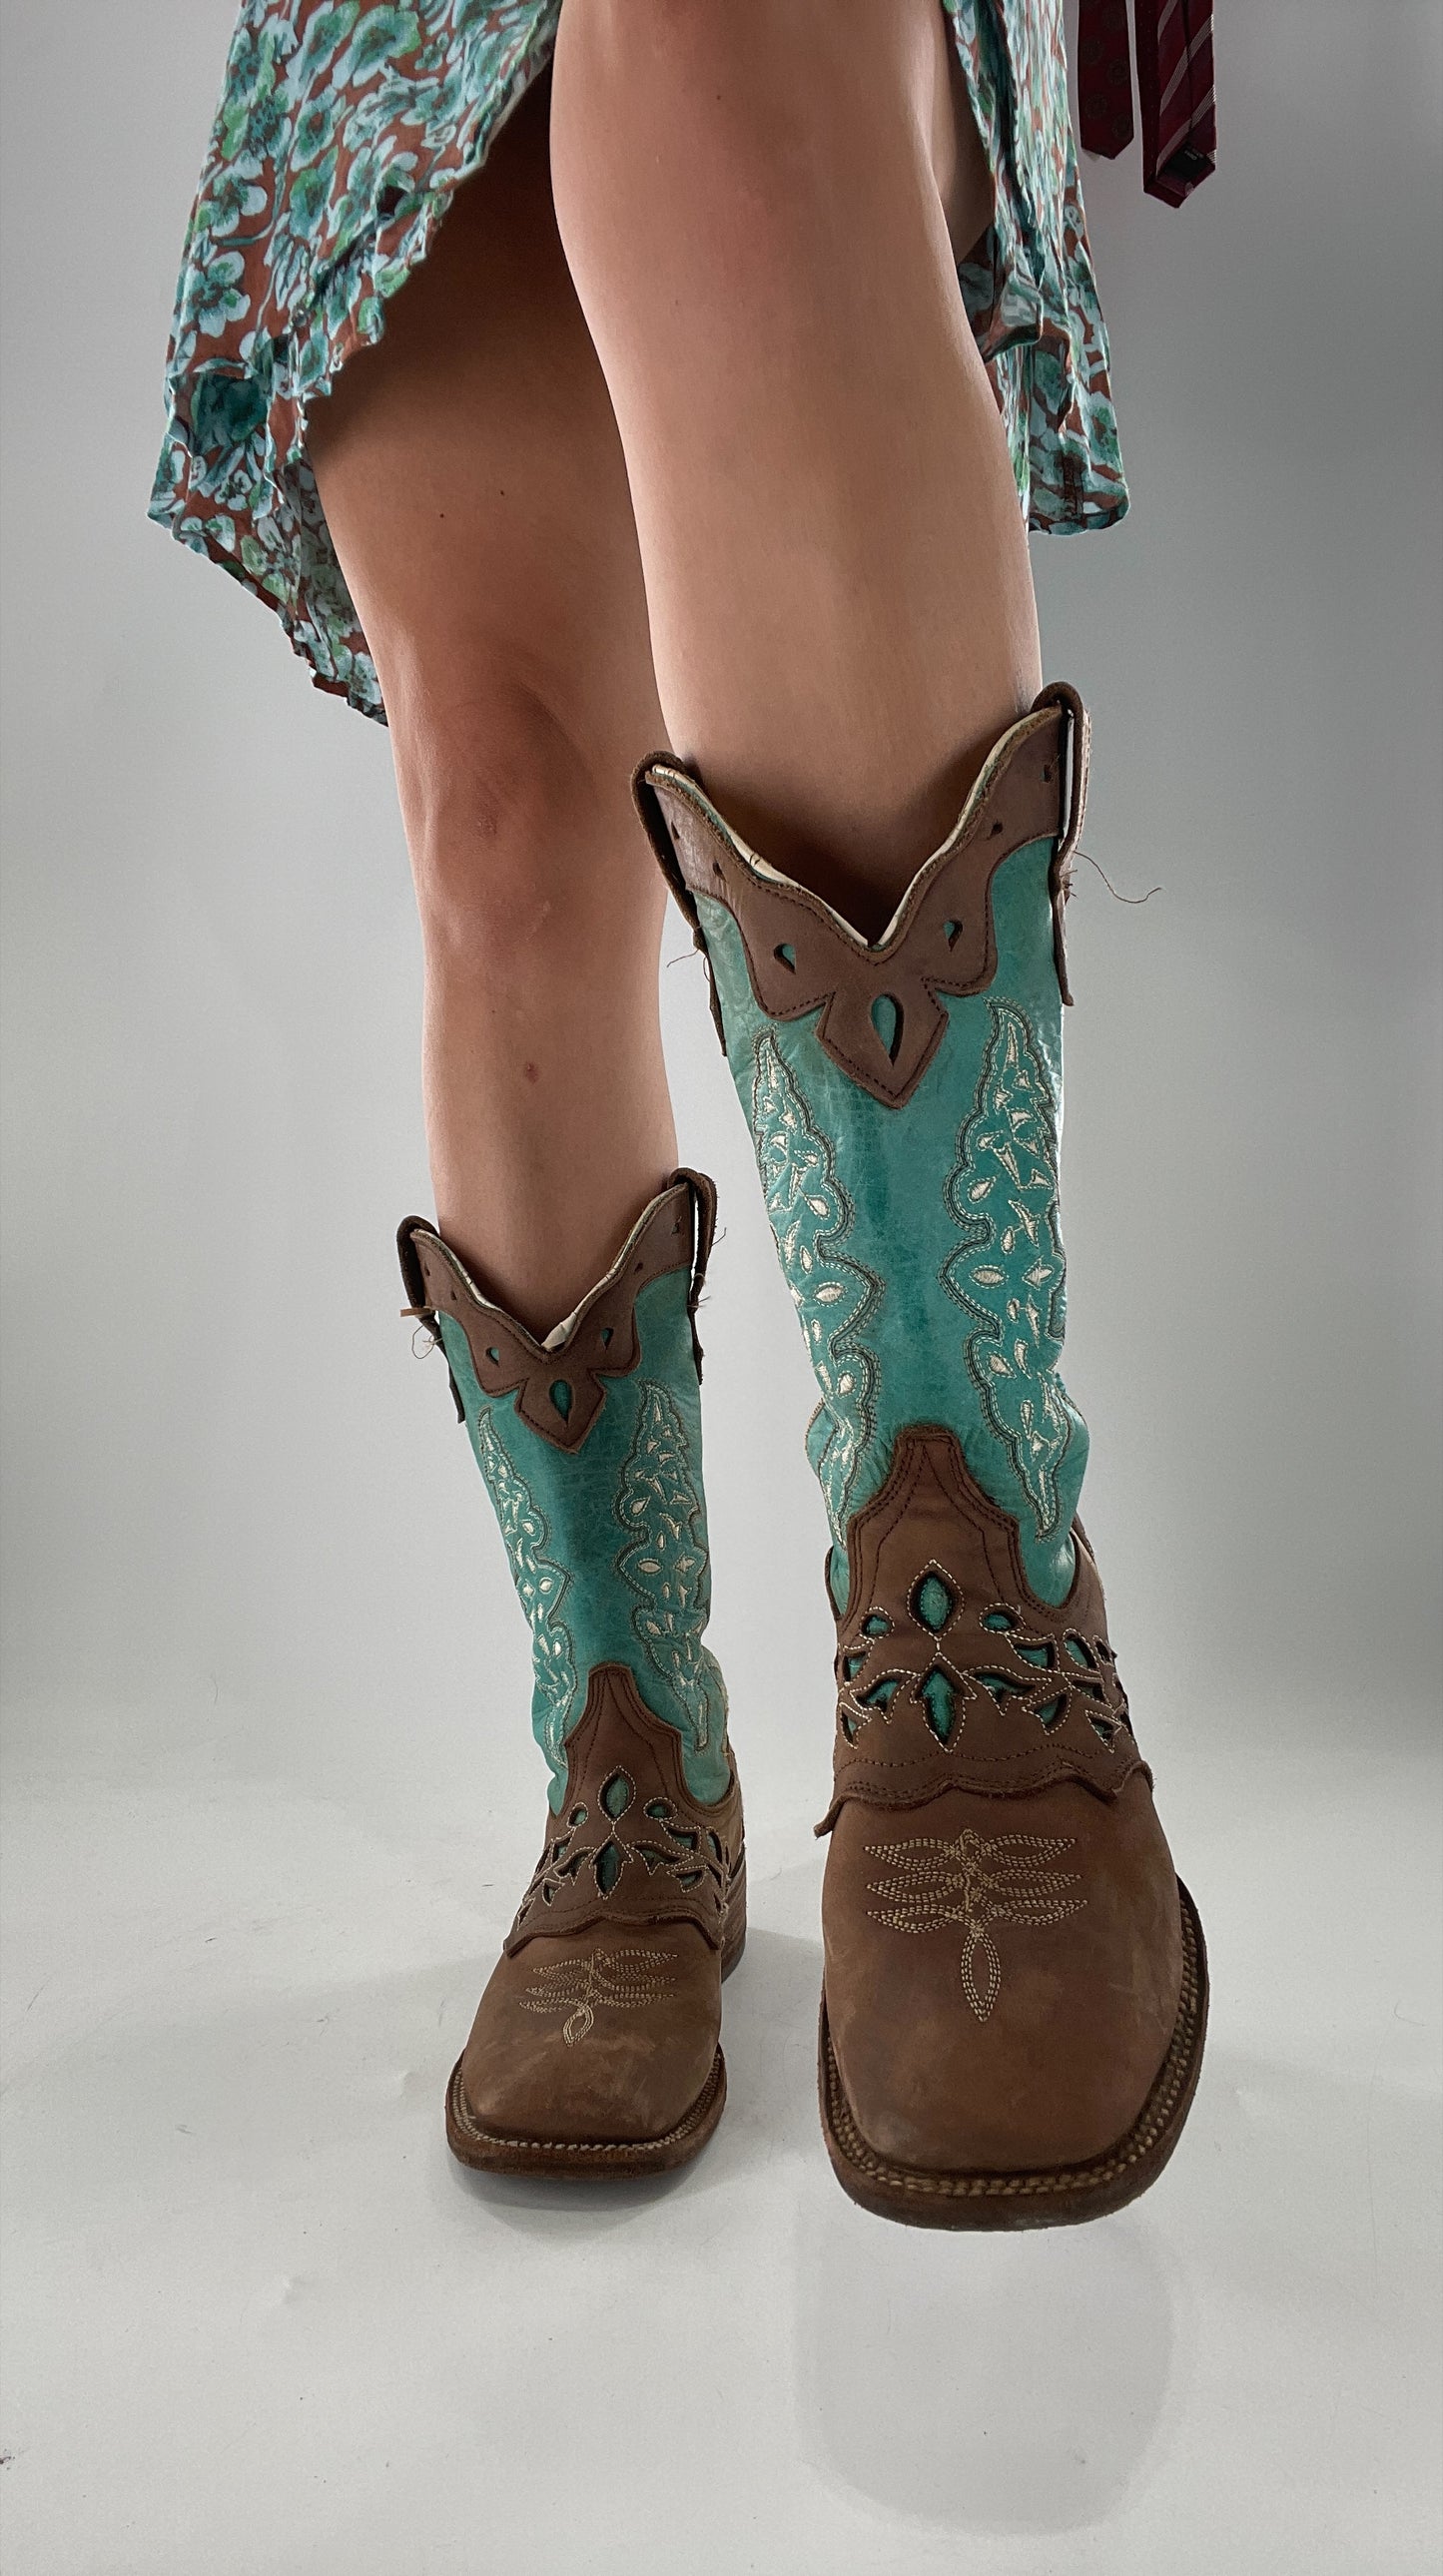 Porto Rebelde Turquoise Blue and Brown Leather Lazer Cut Embroidered Boots (6.5)